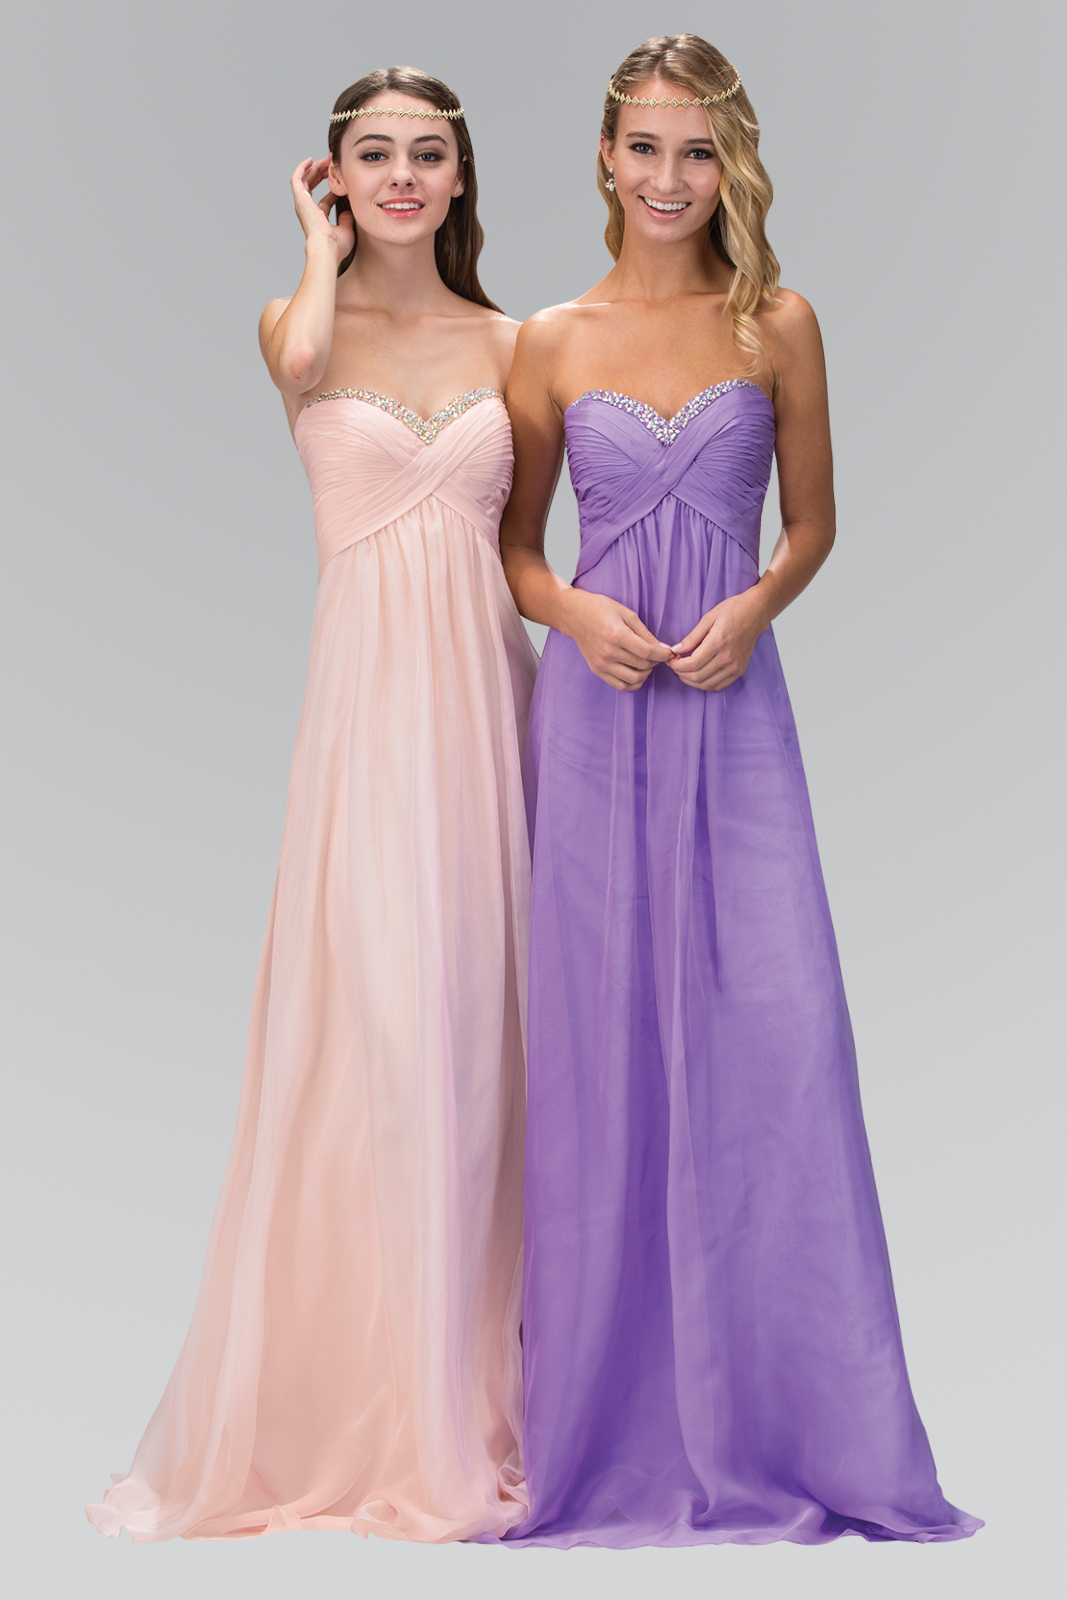 two women in blush and lilac gowns